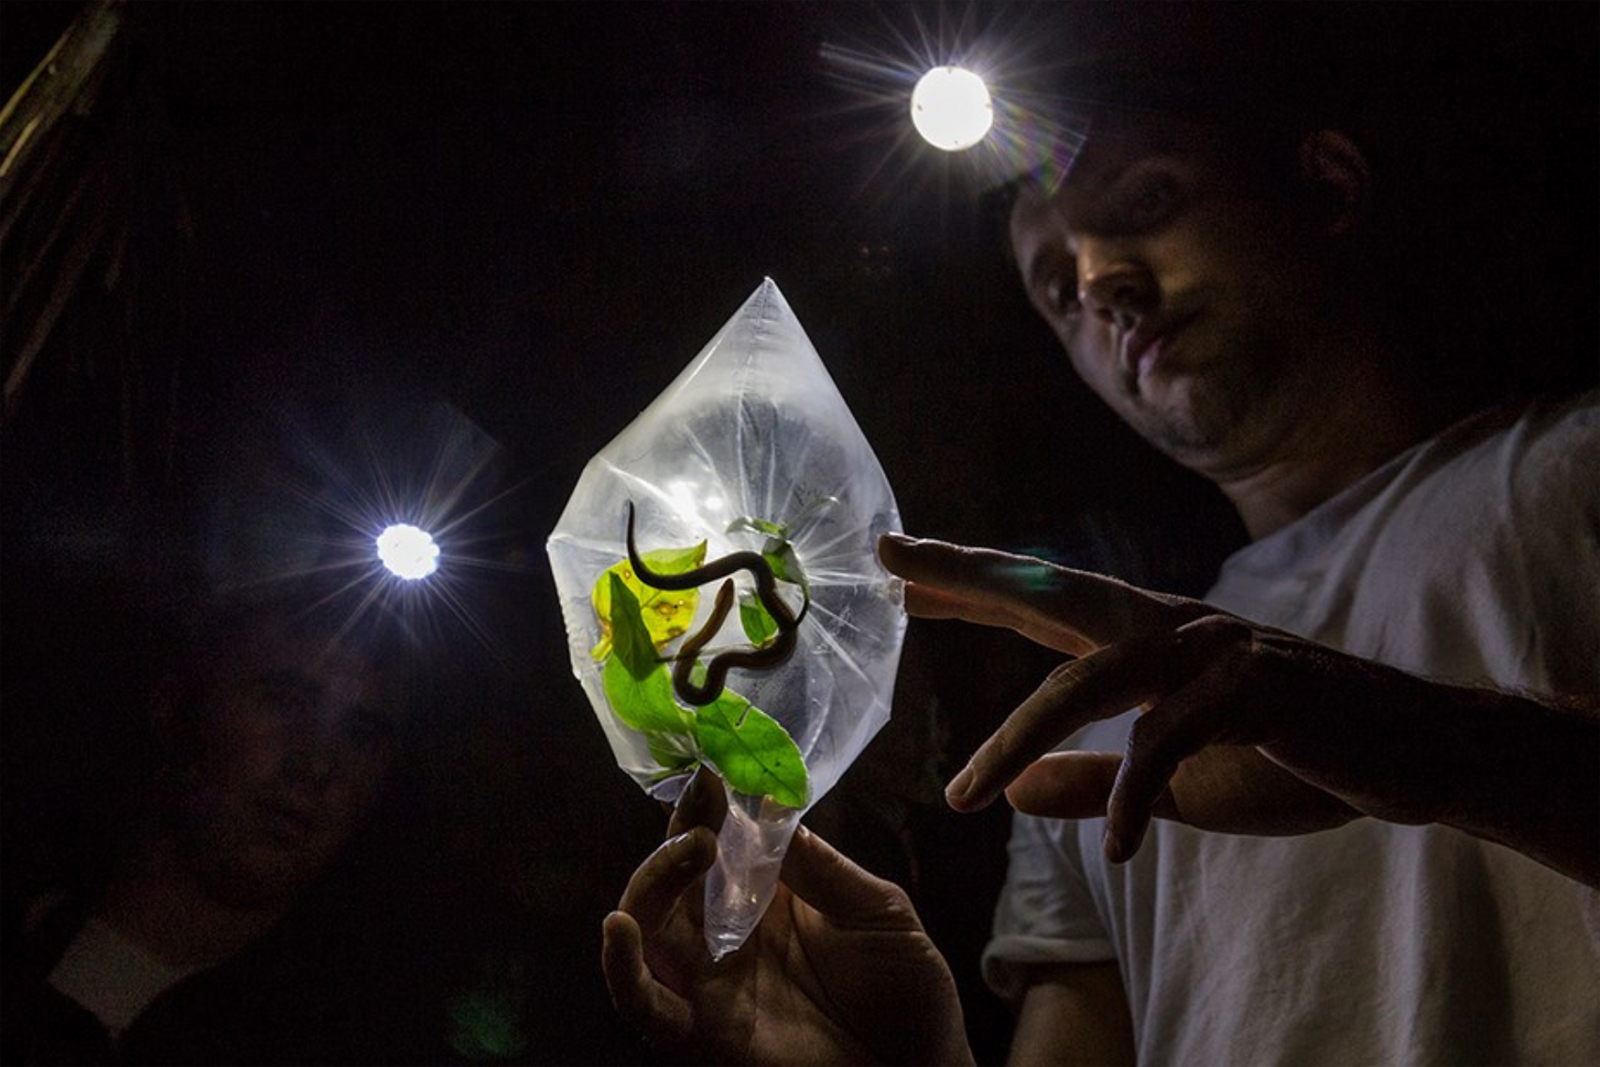 Biologist Alejandro Arteaga examines a live ground snake during a night excursion